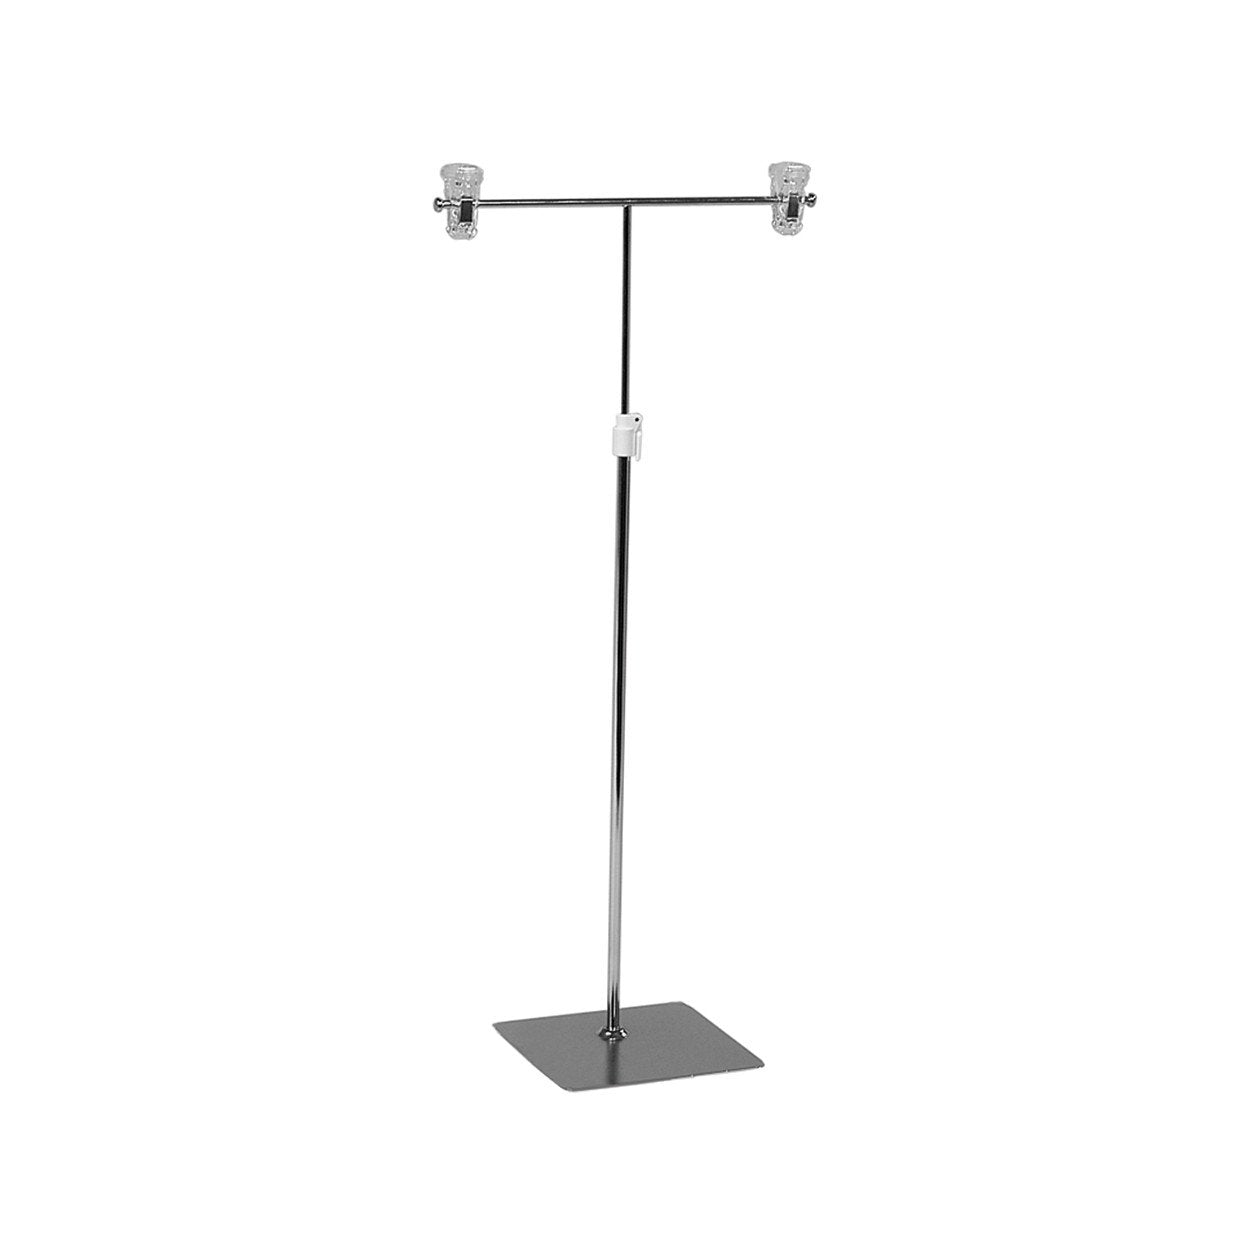 Freestanding Sign Display Adjustable Height - W150 x D150 Base